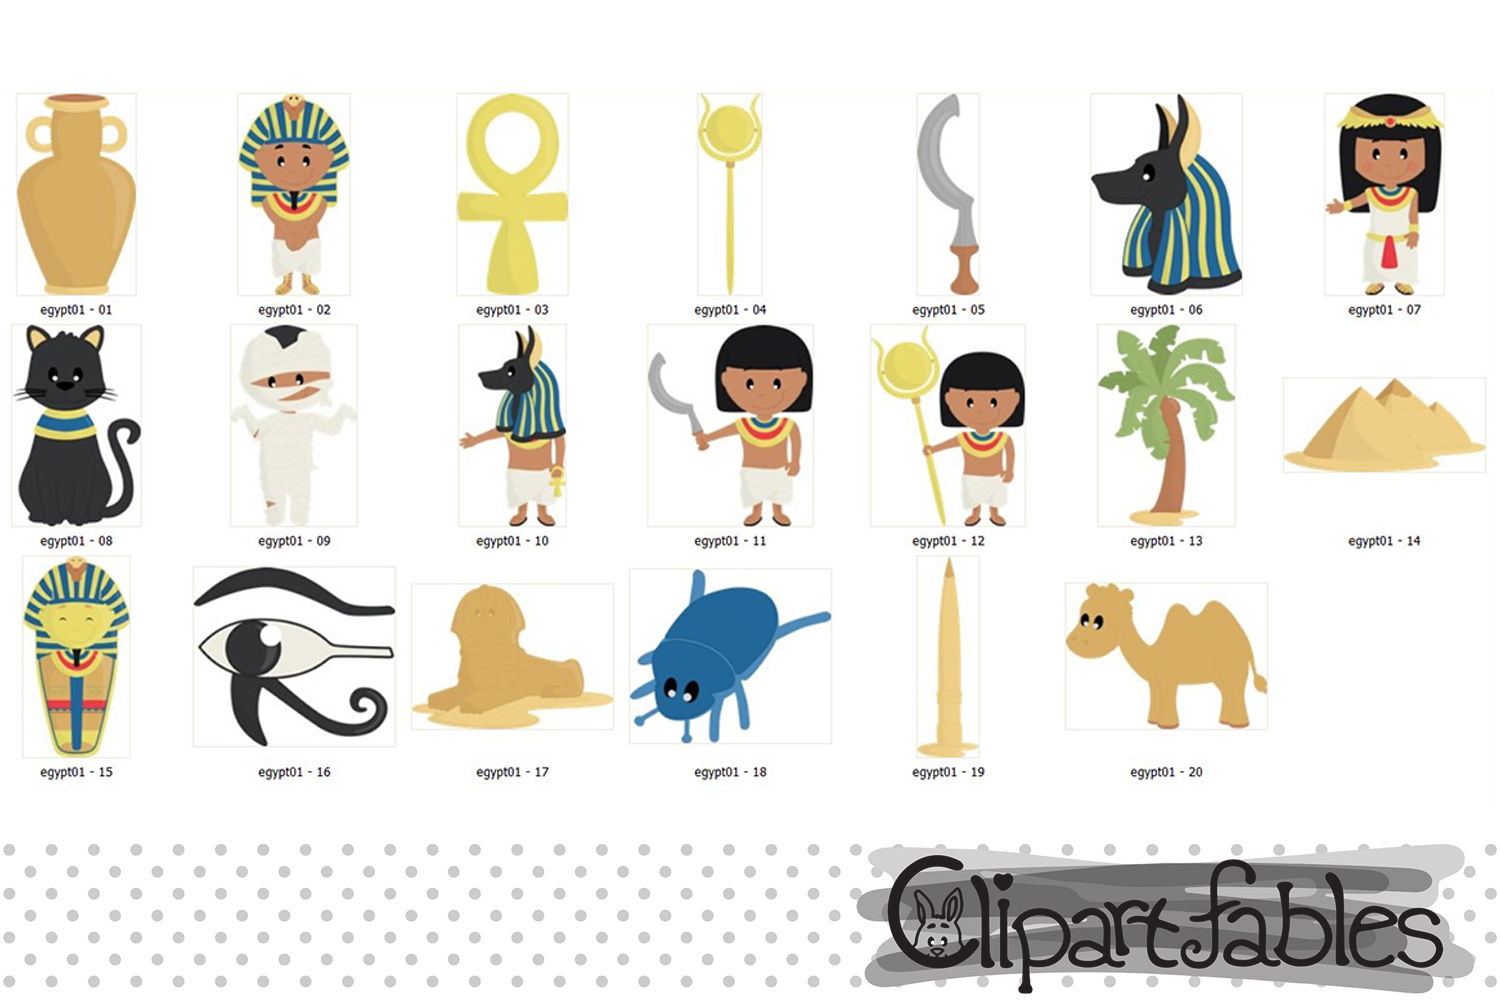 egypt clipart ancient times